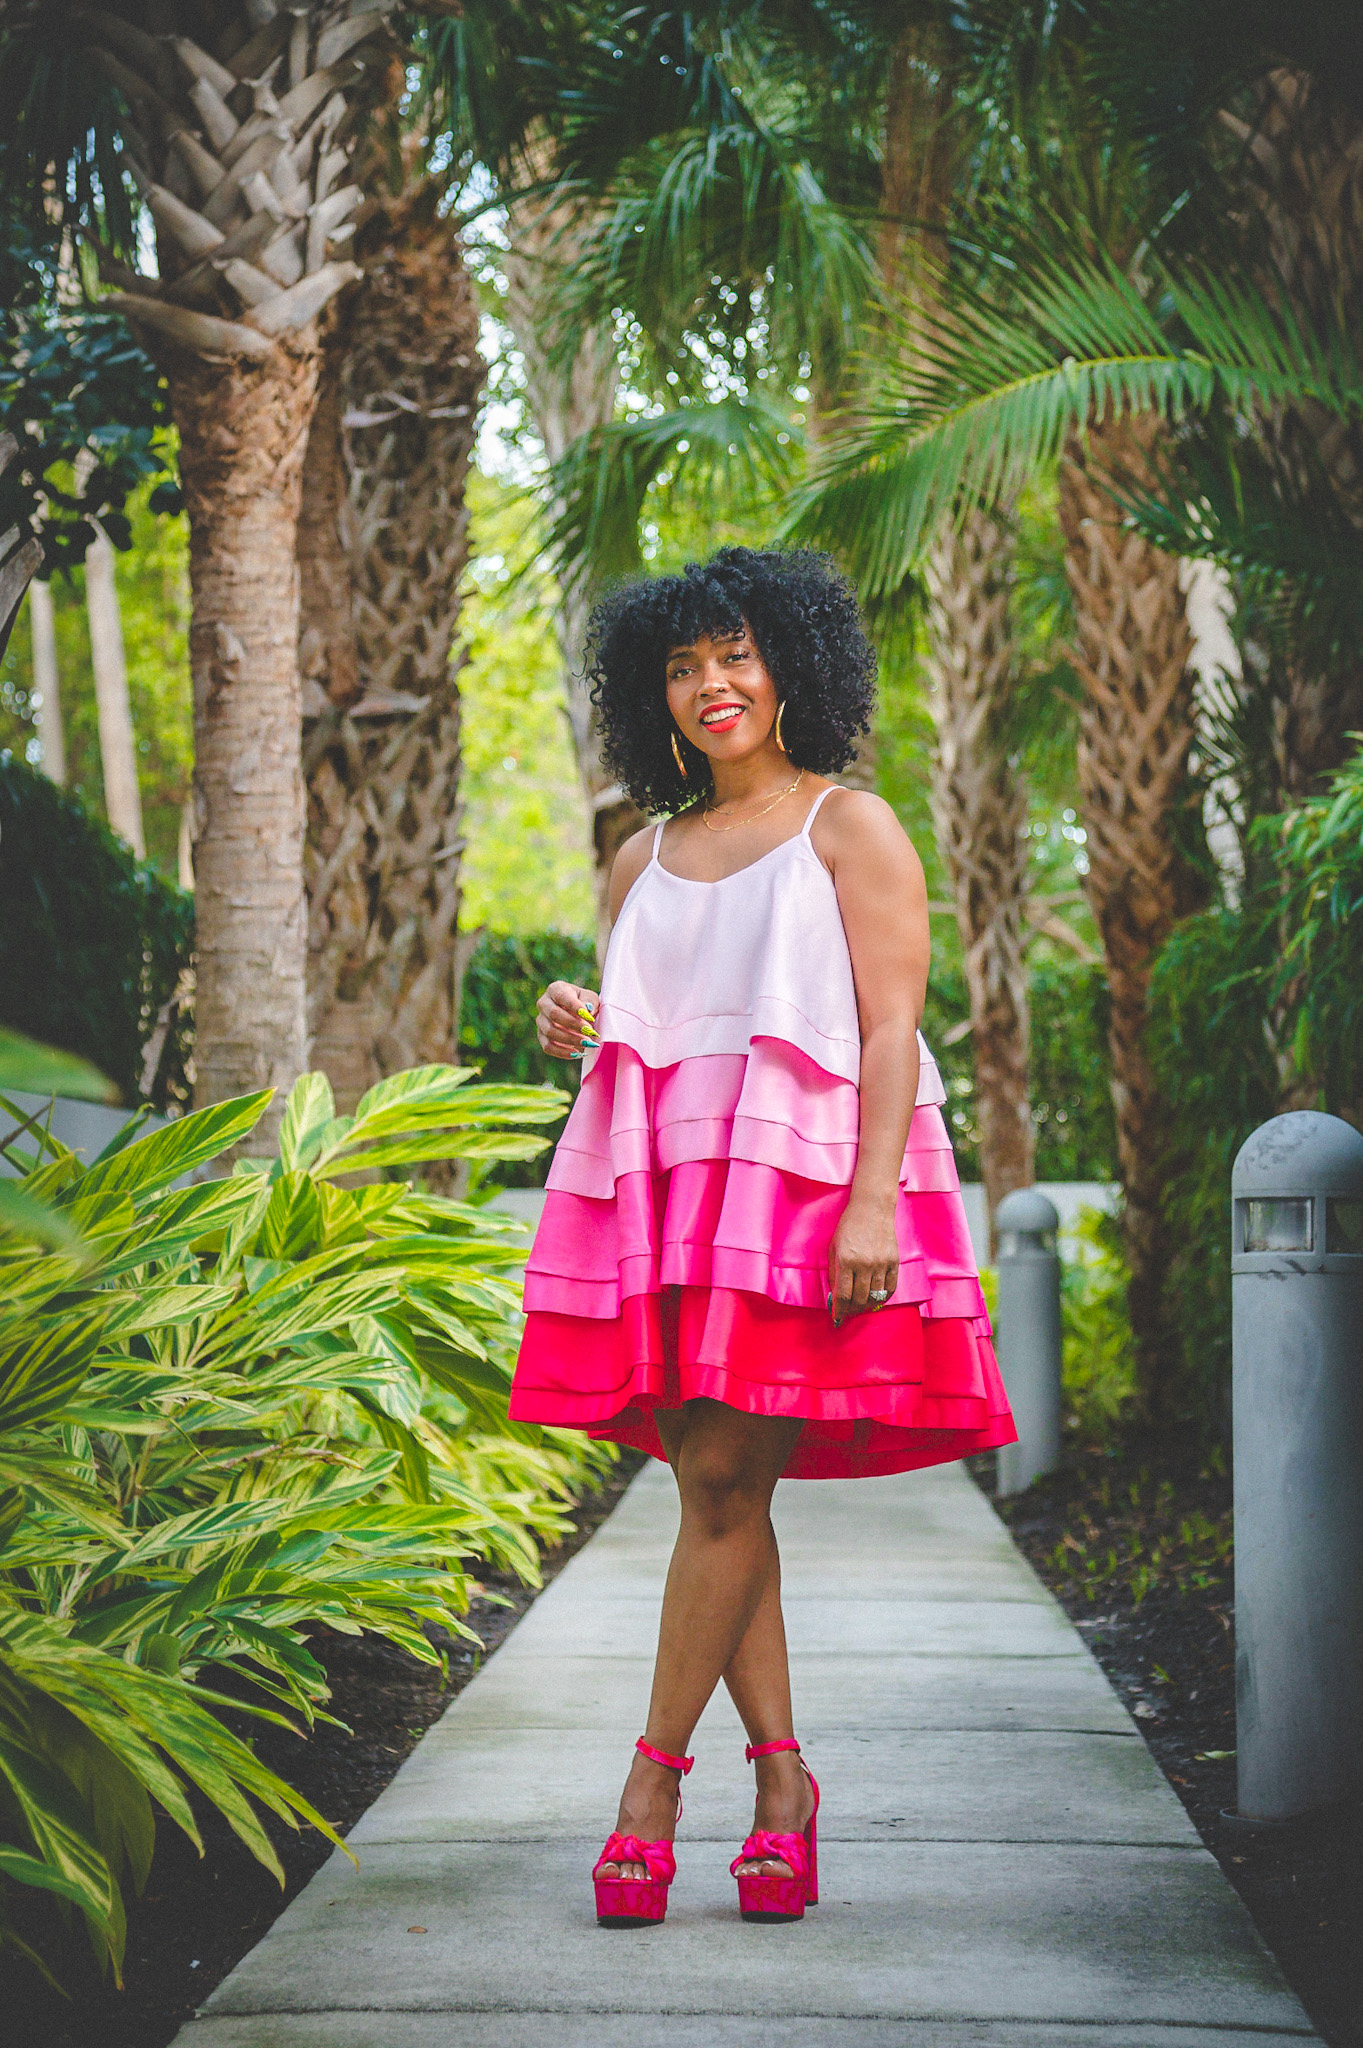 Sweenee Style, Spring/Summer Style, Indianapolis Fashion Blog, Indianapolis Fashion Influencer, Natural Curls, Adrienne from Sweenee Style, Spring Dresses, Summer Dresses